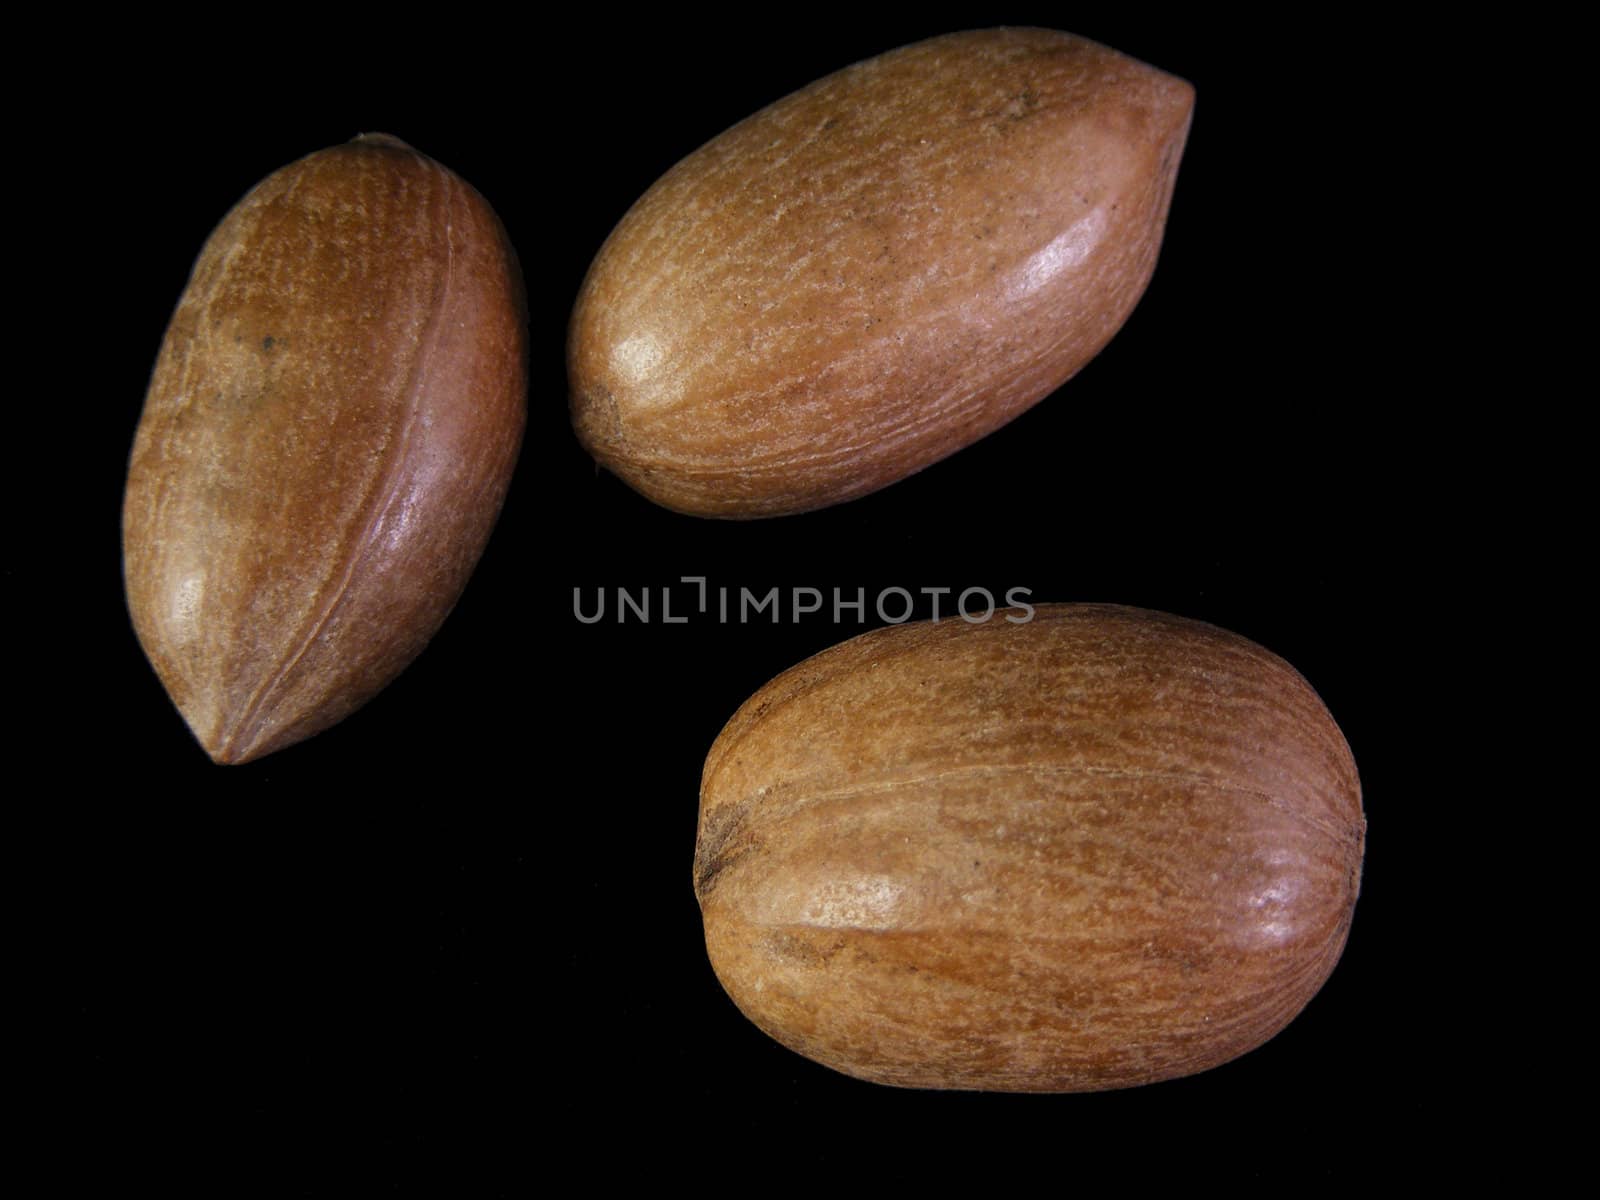 Three unshelled pecans against a black background.